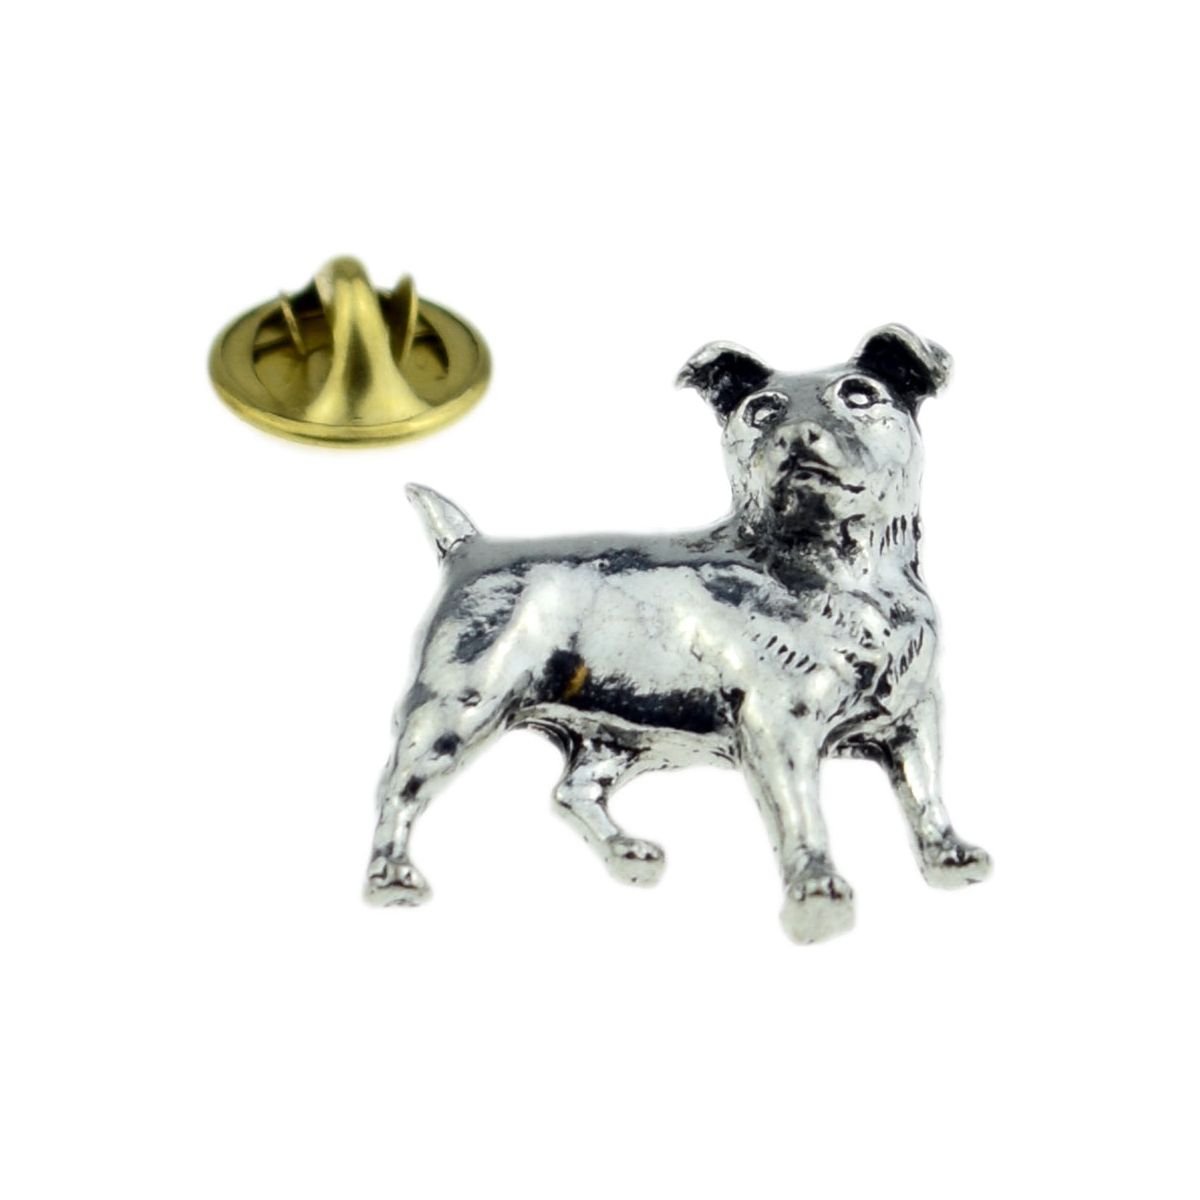 Jack Russell Dog Pewter Lapel Pin Badge - Ashton and Finch